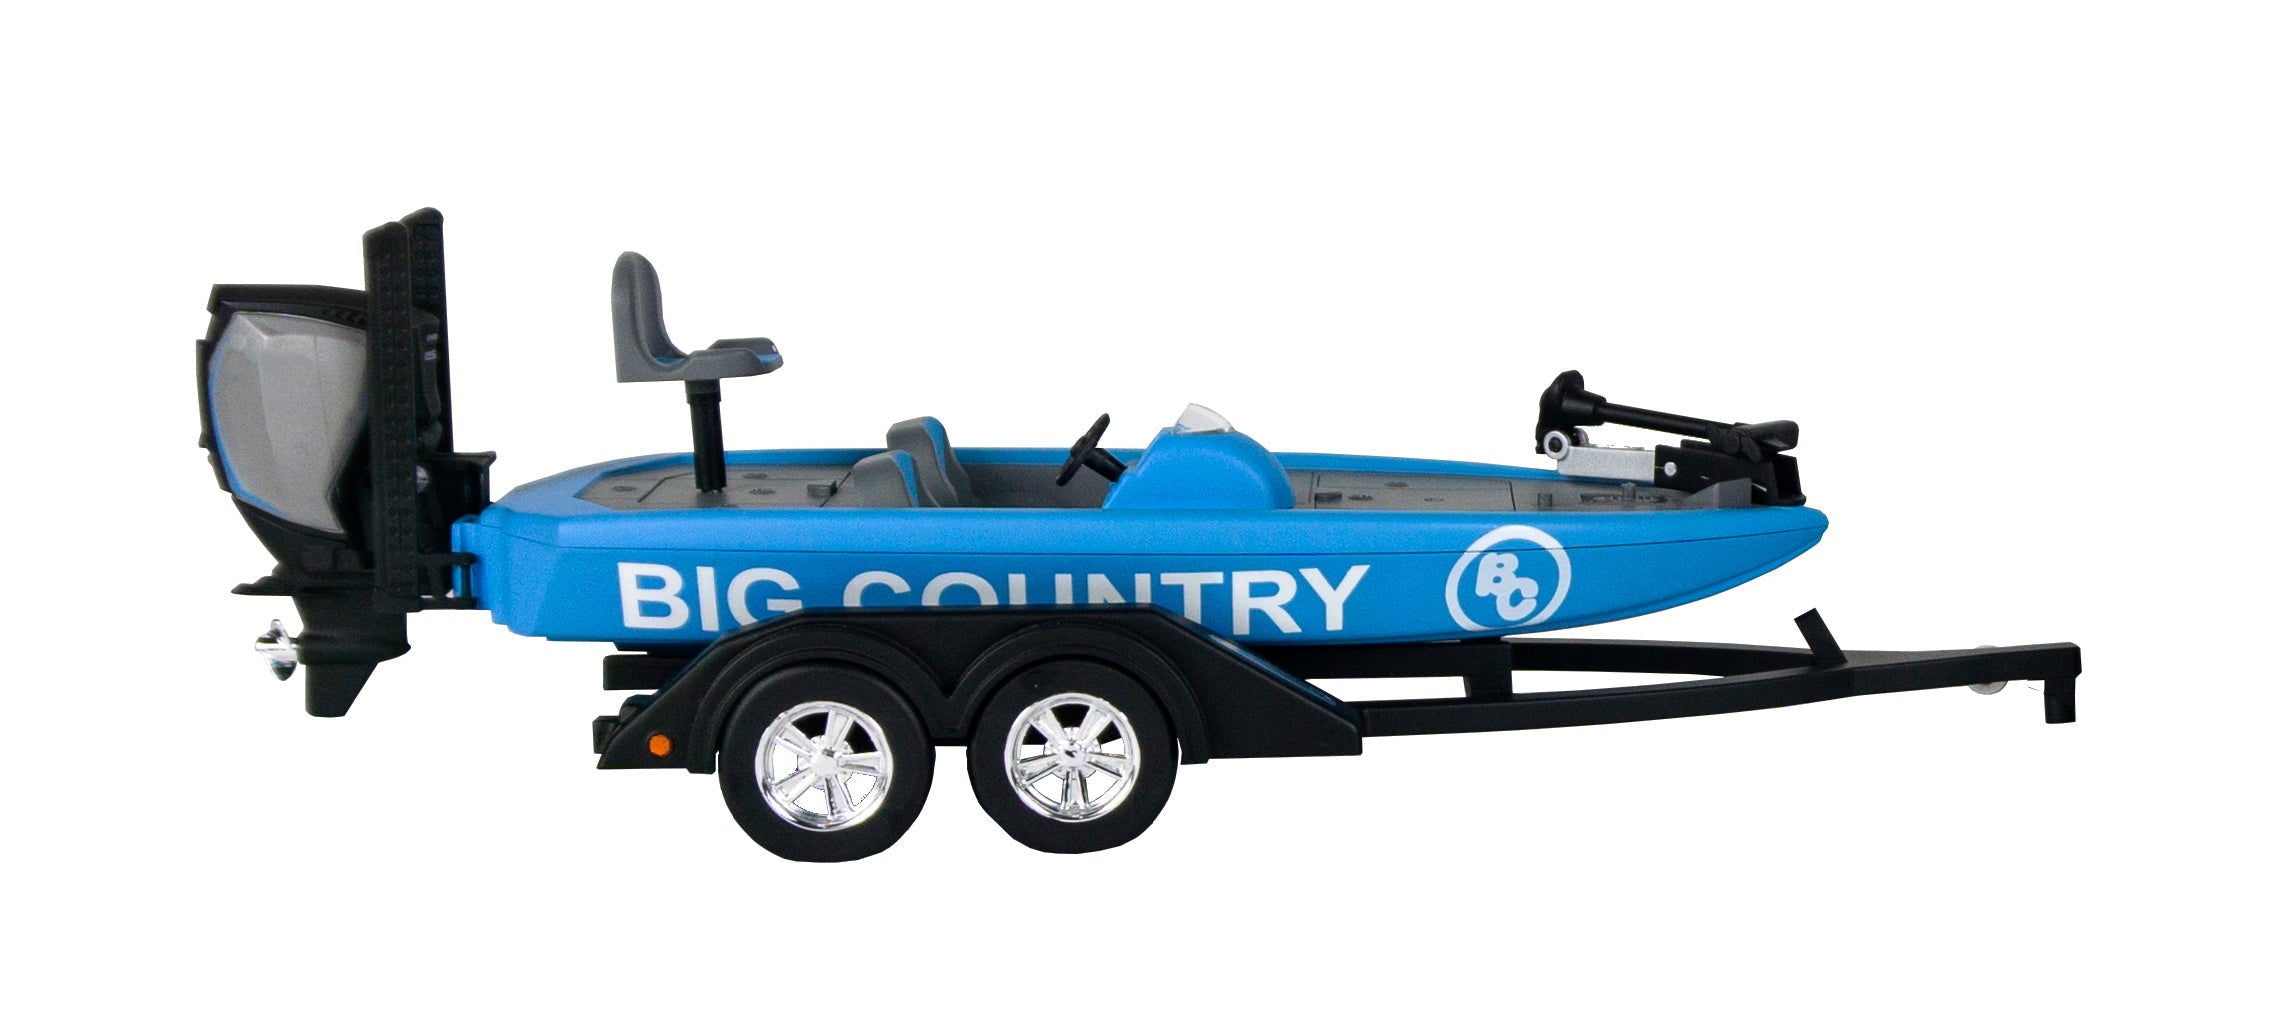 Big Country Toys, Bass Fishing Boat, Fishing Toys